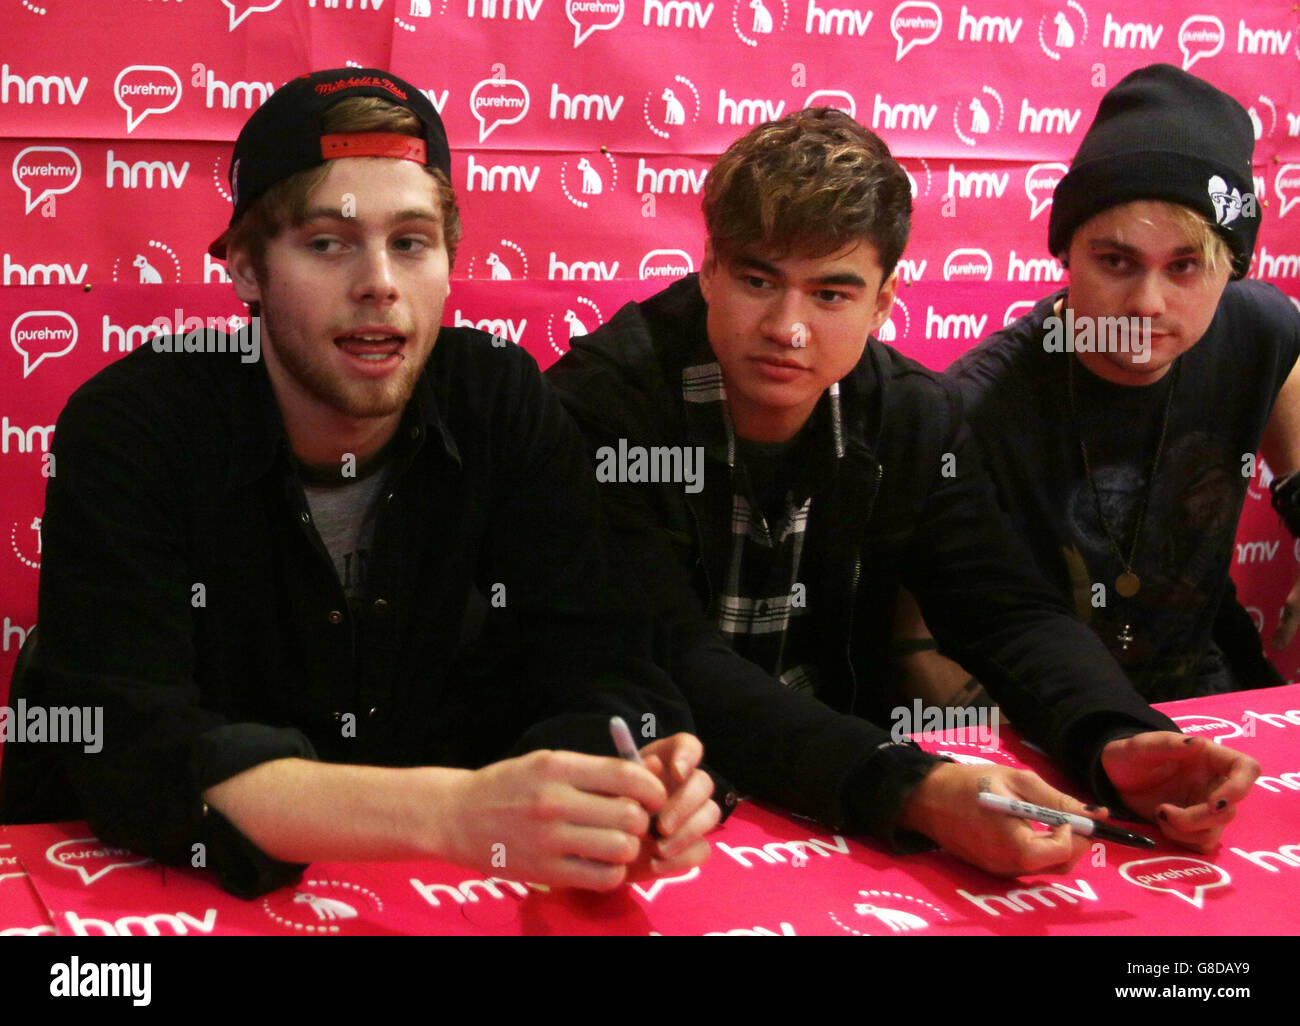 Australian band 5 Seconds of Summer (left to right) Luke Hemmings, Calum Hood and Michael Clifford during a signing session at HMV Glasgow for their new album, Sounds Good Feel Good. Stock Photo